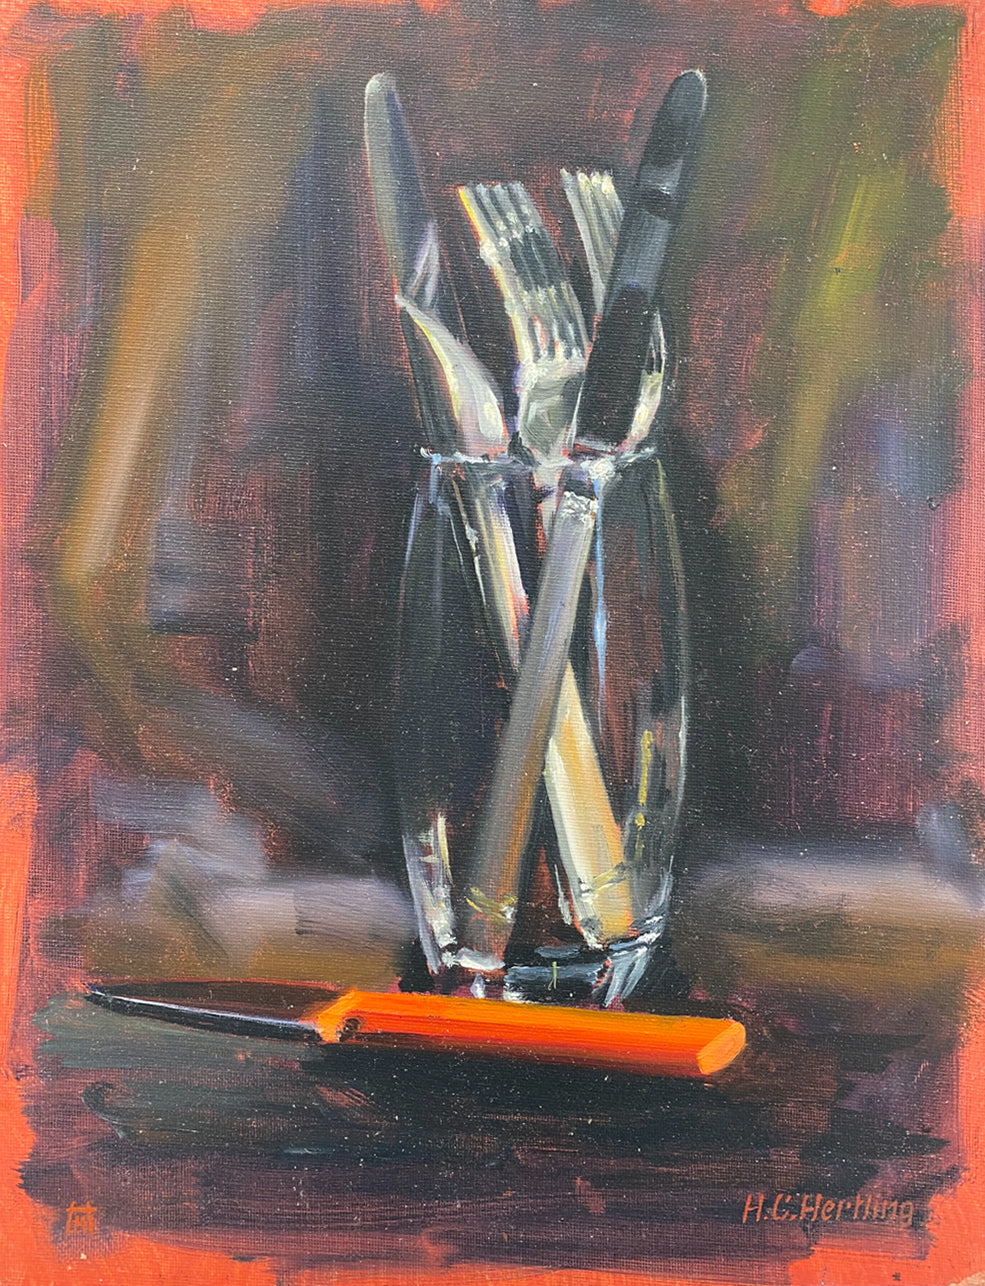 Cutlery. Still life painting by Heiner Hertling.  Oil on board.  